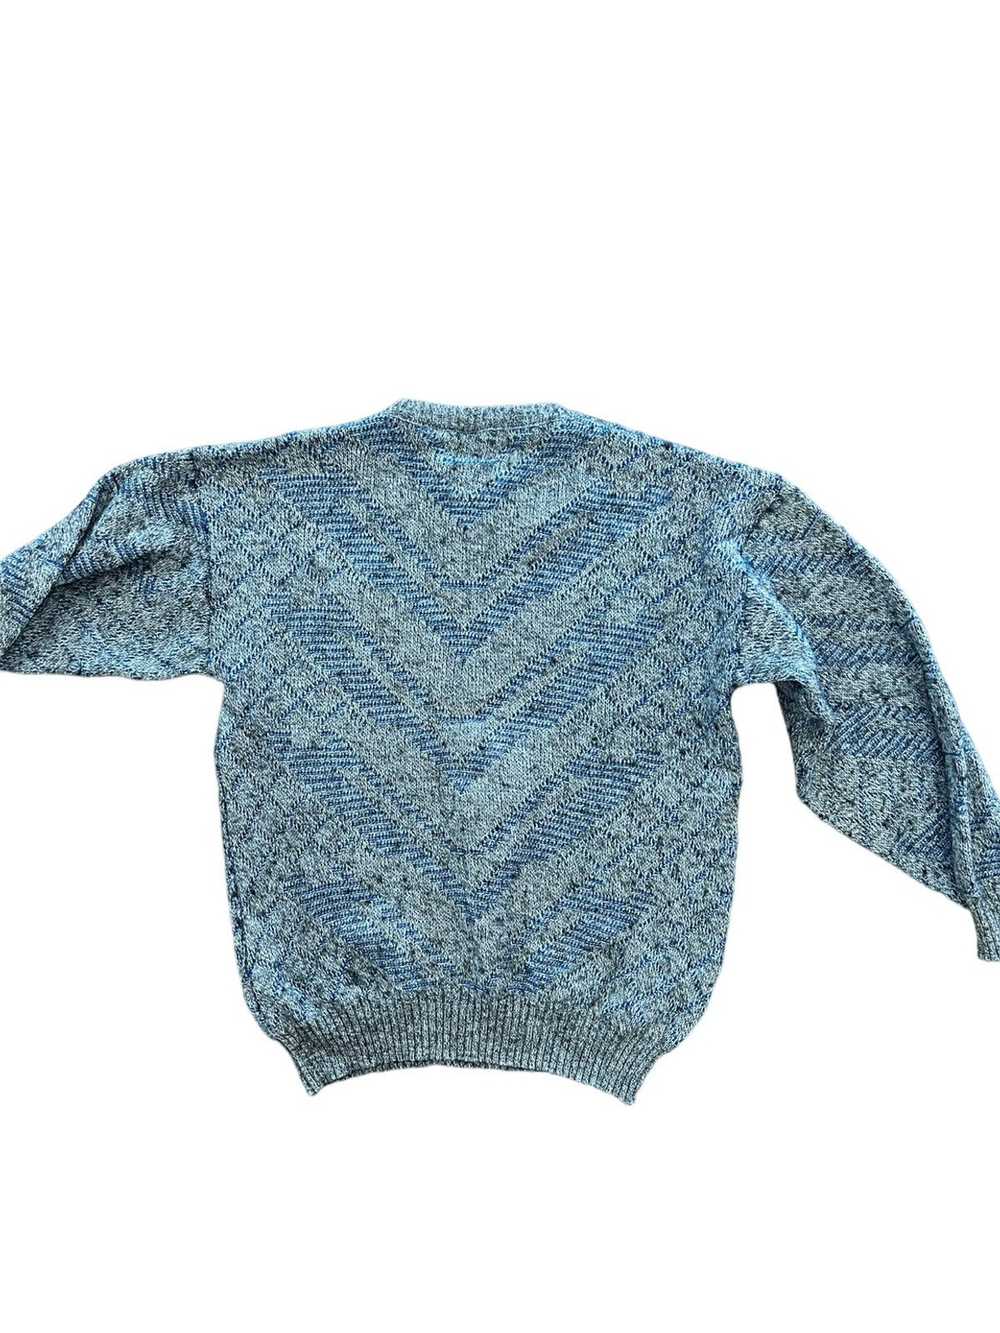 Coloured Cable Knit Sweater × Vintage Vintage Ita… - image 2